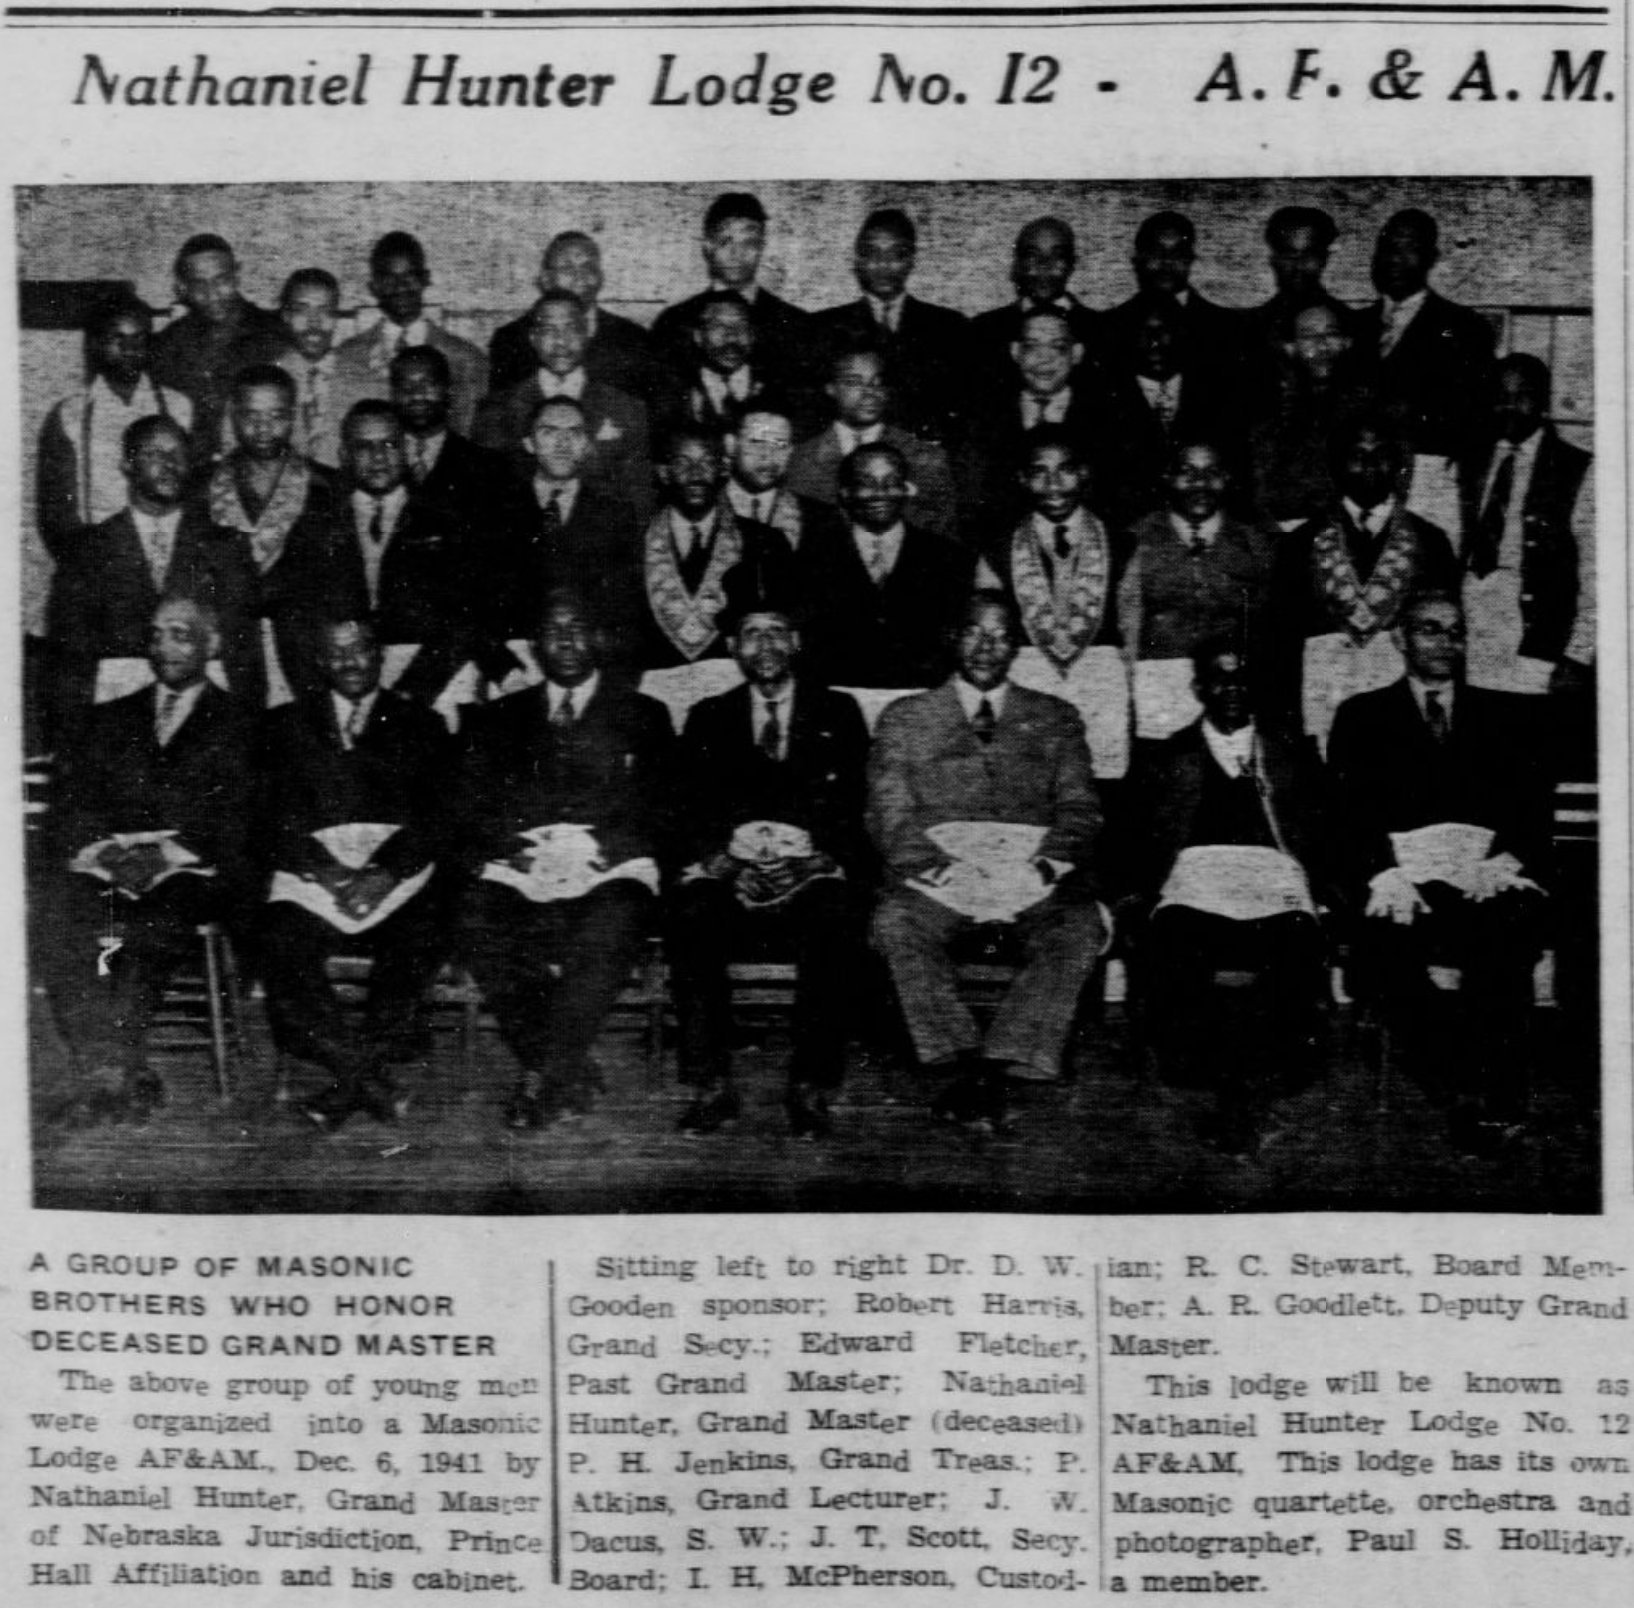 On April 4, 1942 these members formed a new Prince Hall Masons Lodge in Omaha called the Nathaniel Hunter Lodge #12.